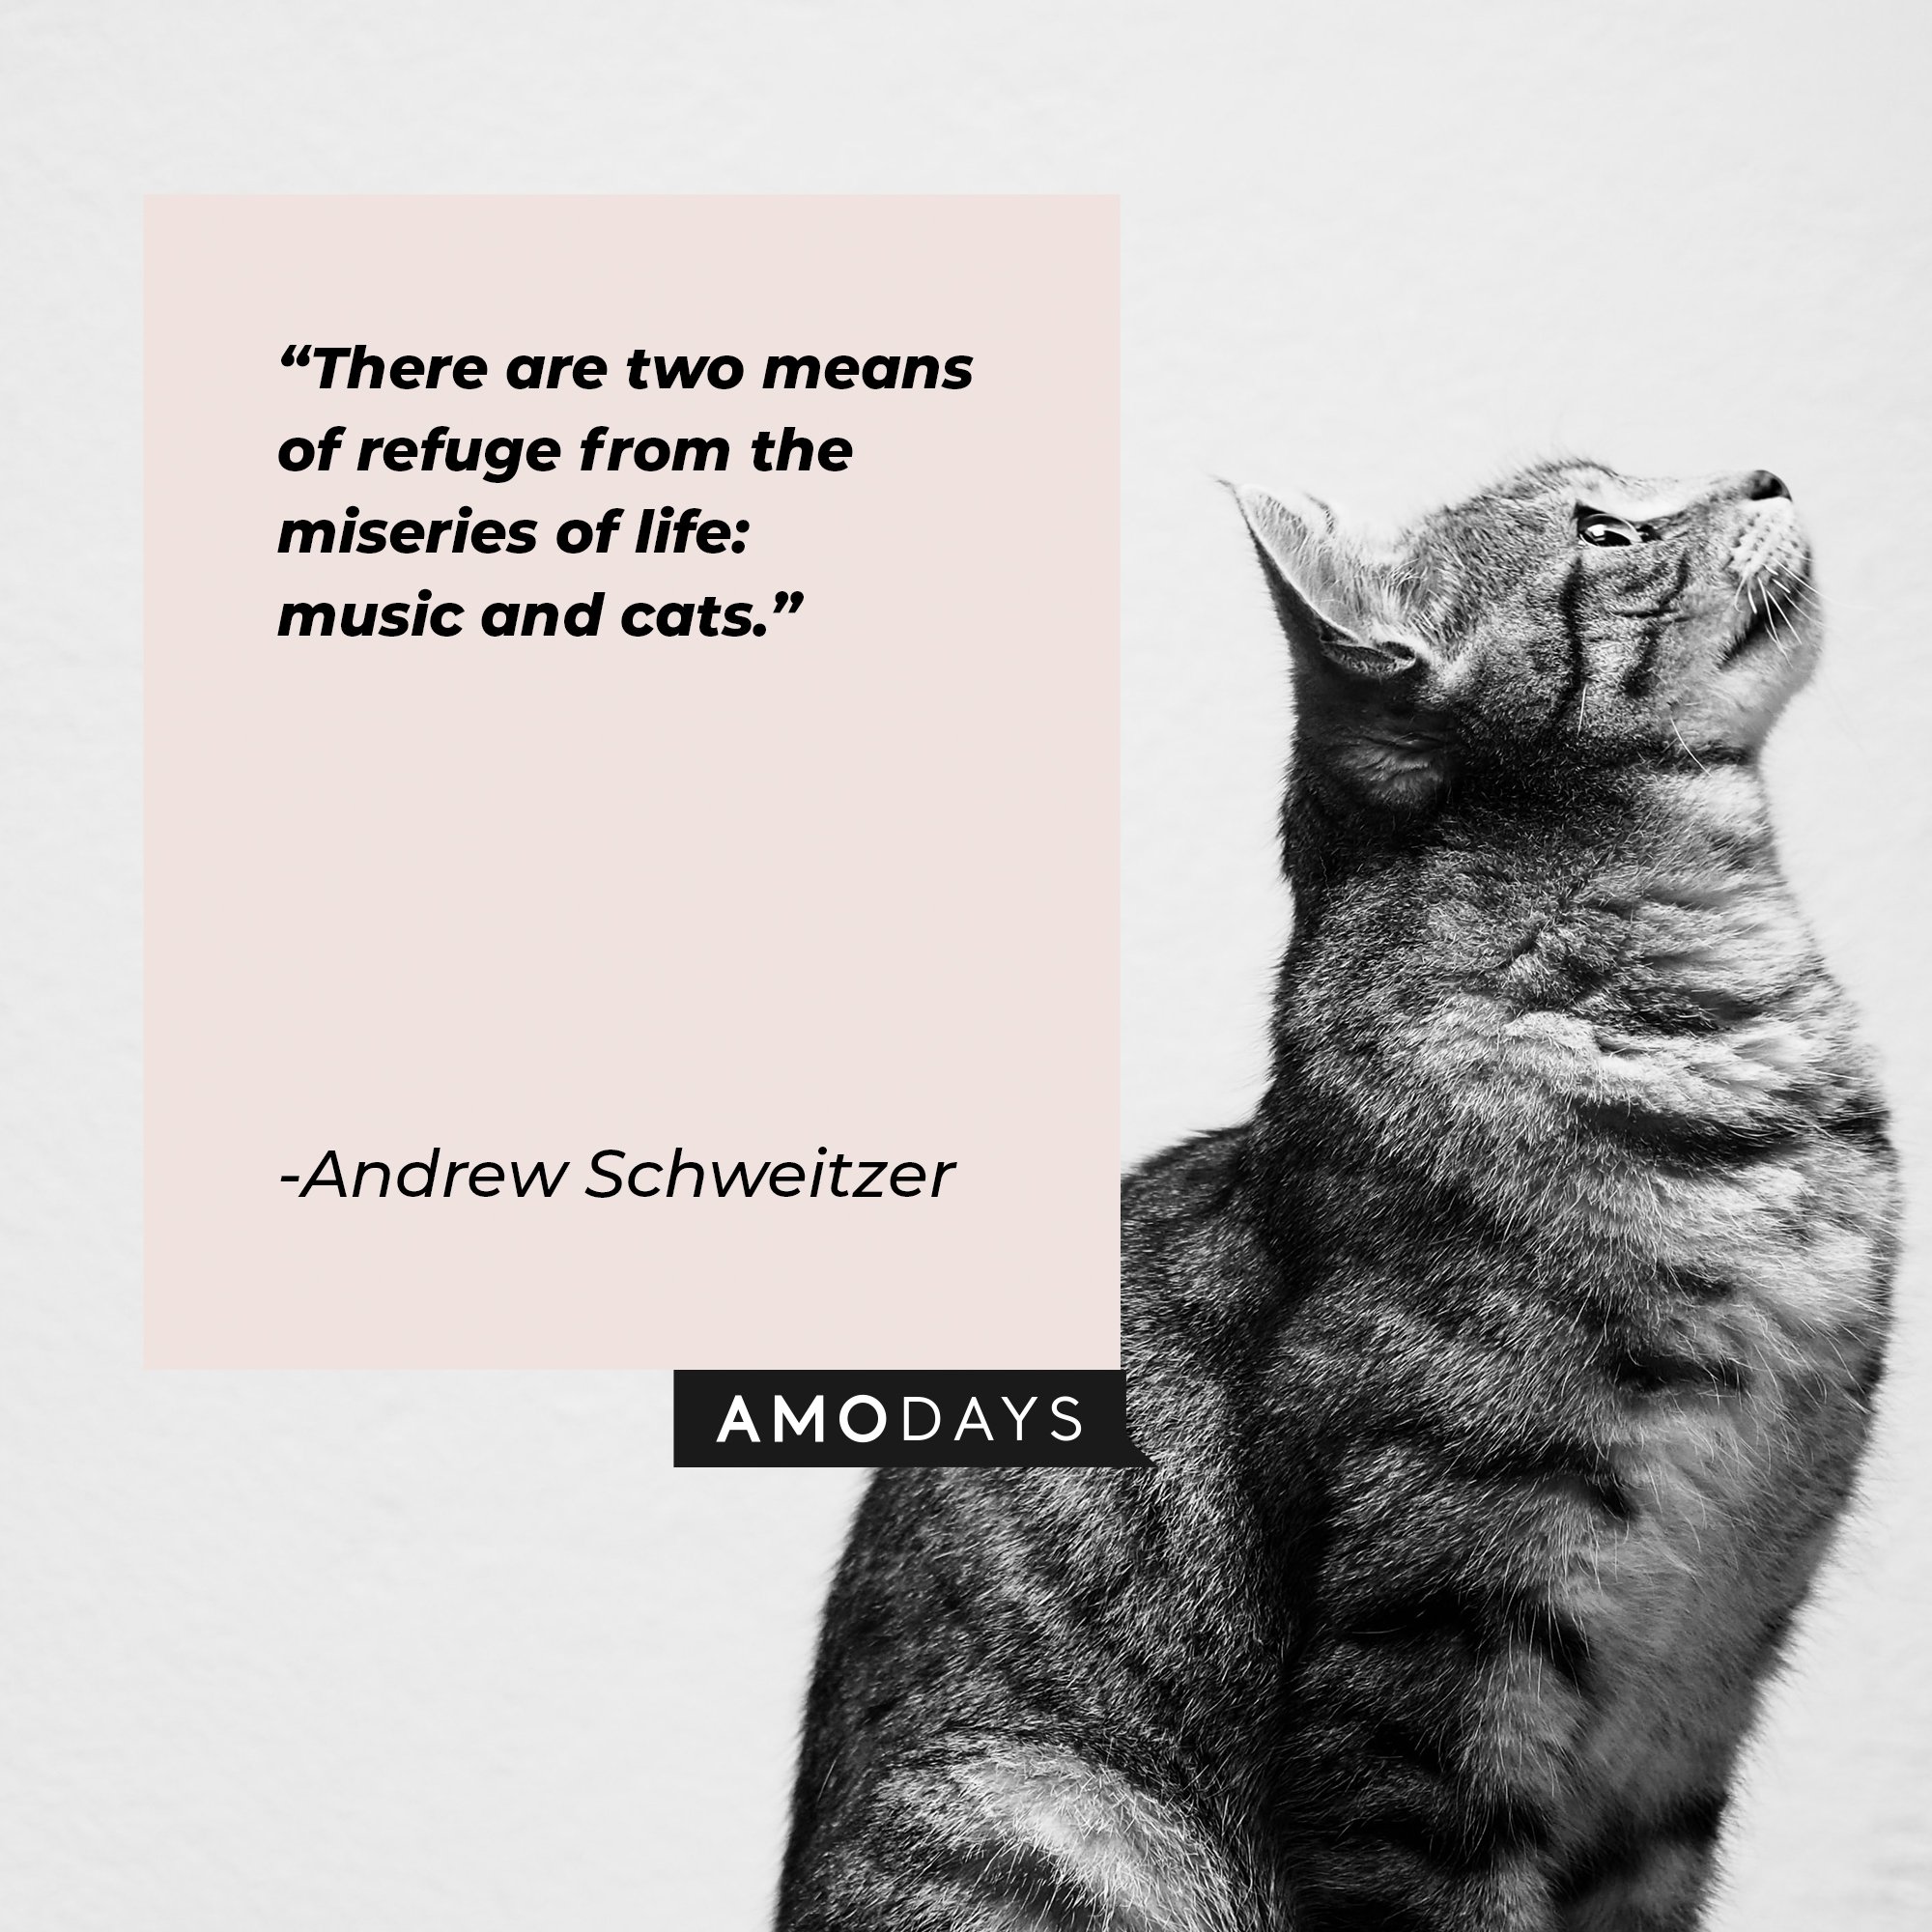 Andrew Schweitzer’s quote: "There are two means of refuge from the miseries of life: music and cats." | Image: AmoDays